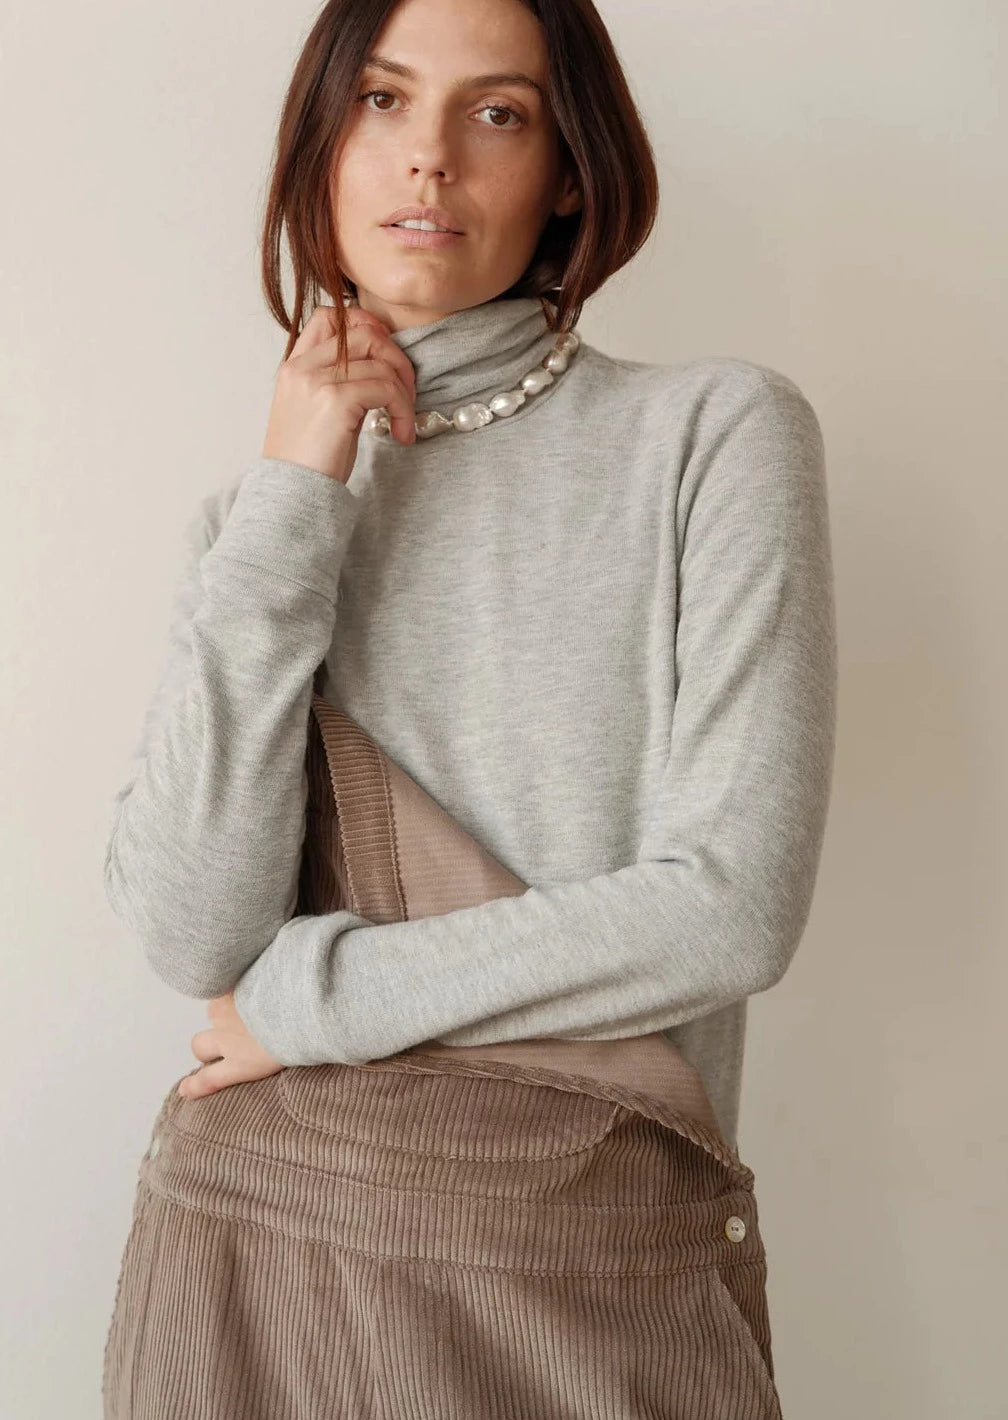 Medium close image of a female model wearing the Sweater Turtleneck in Heather Grey